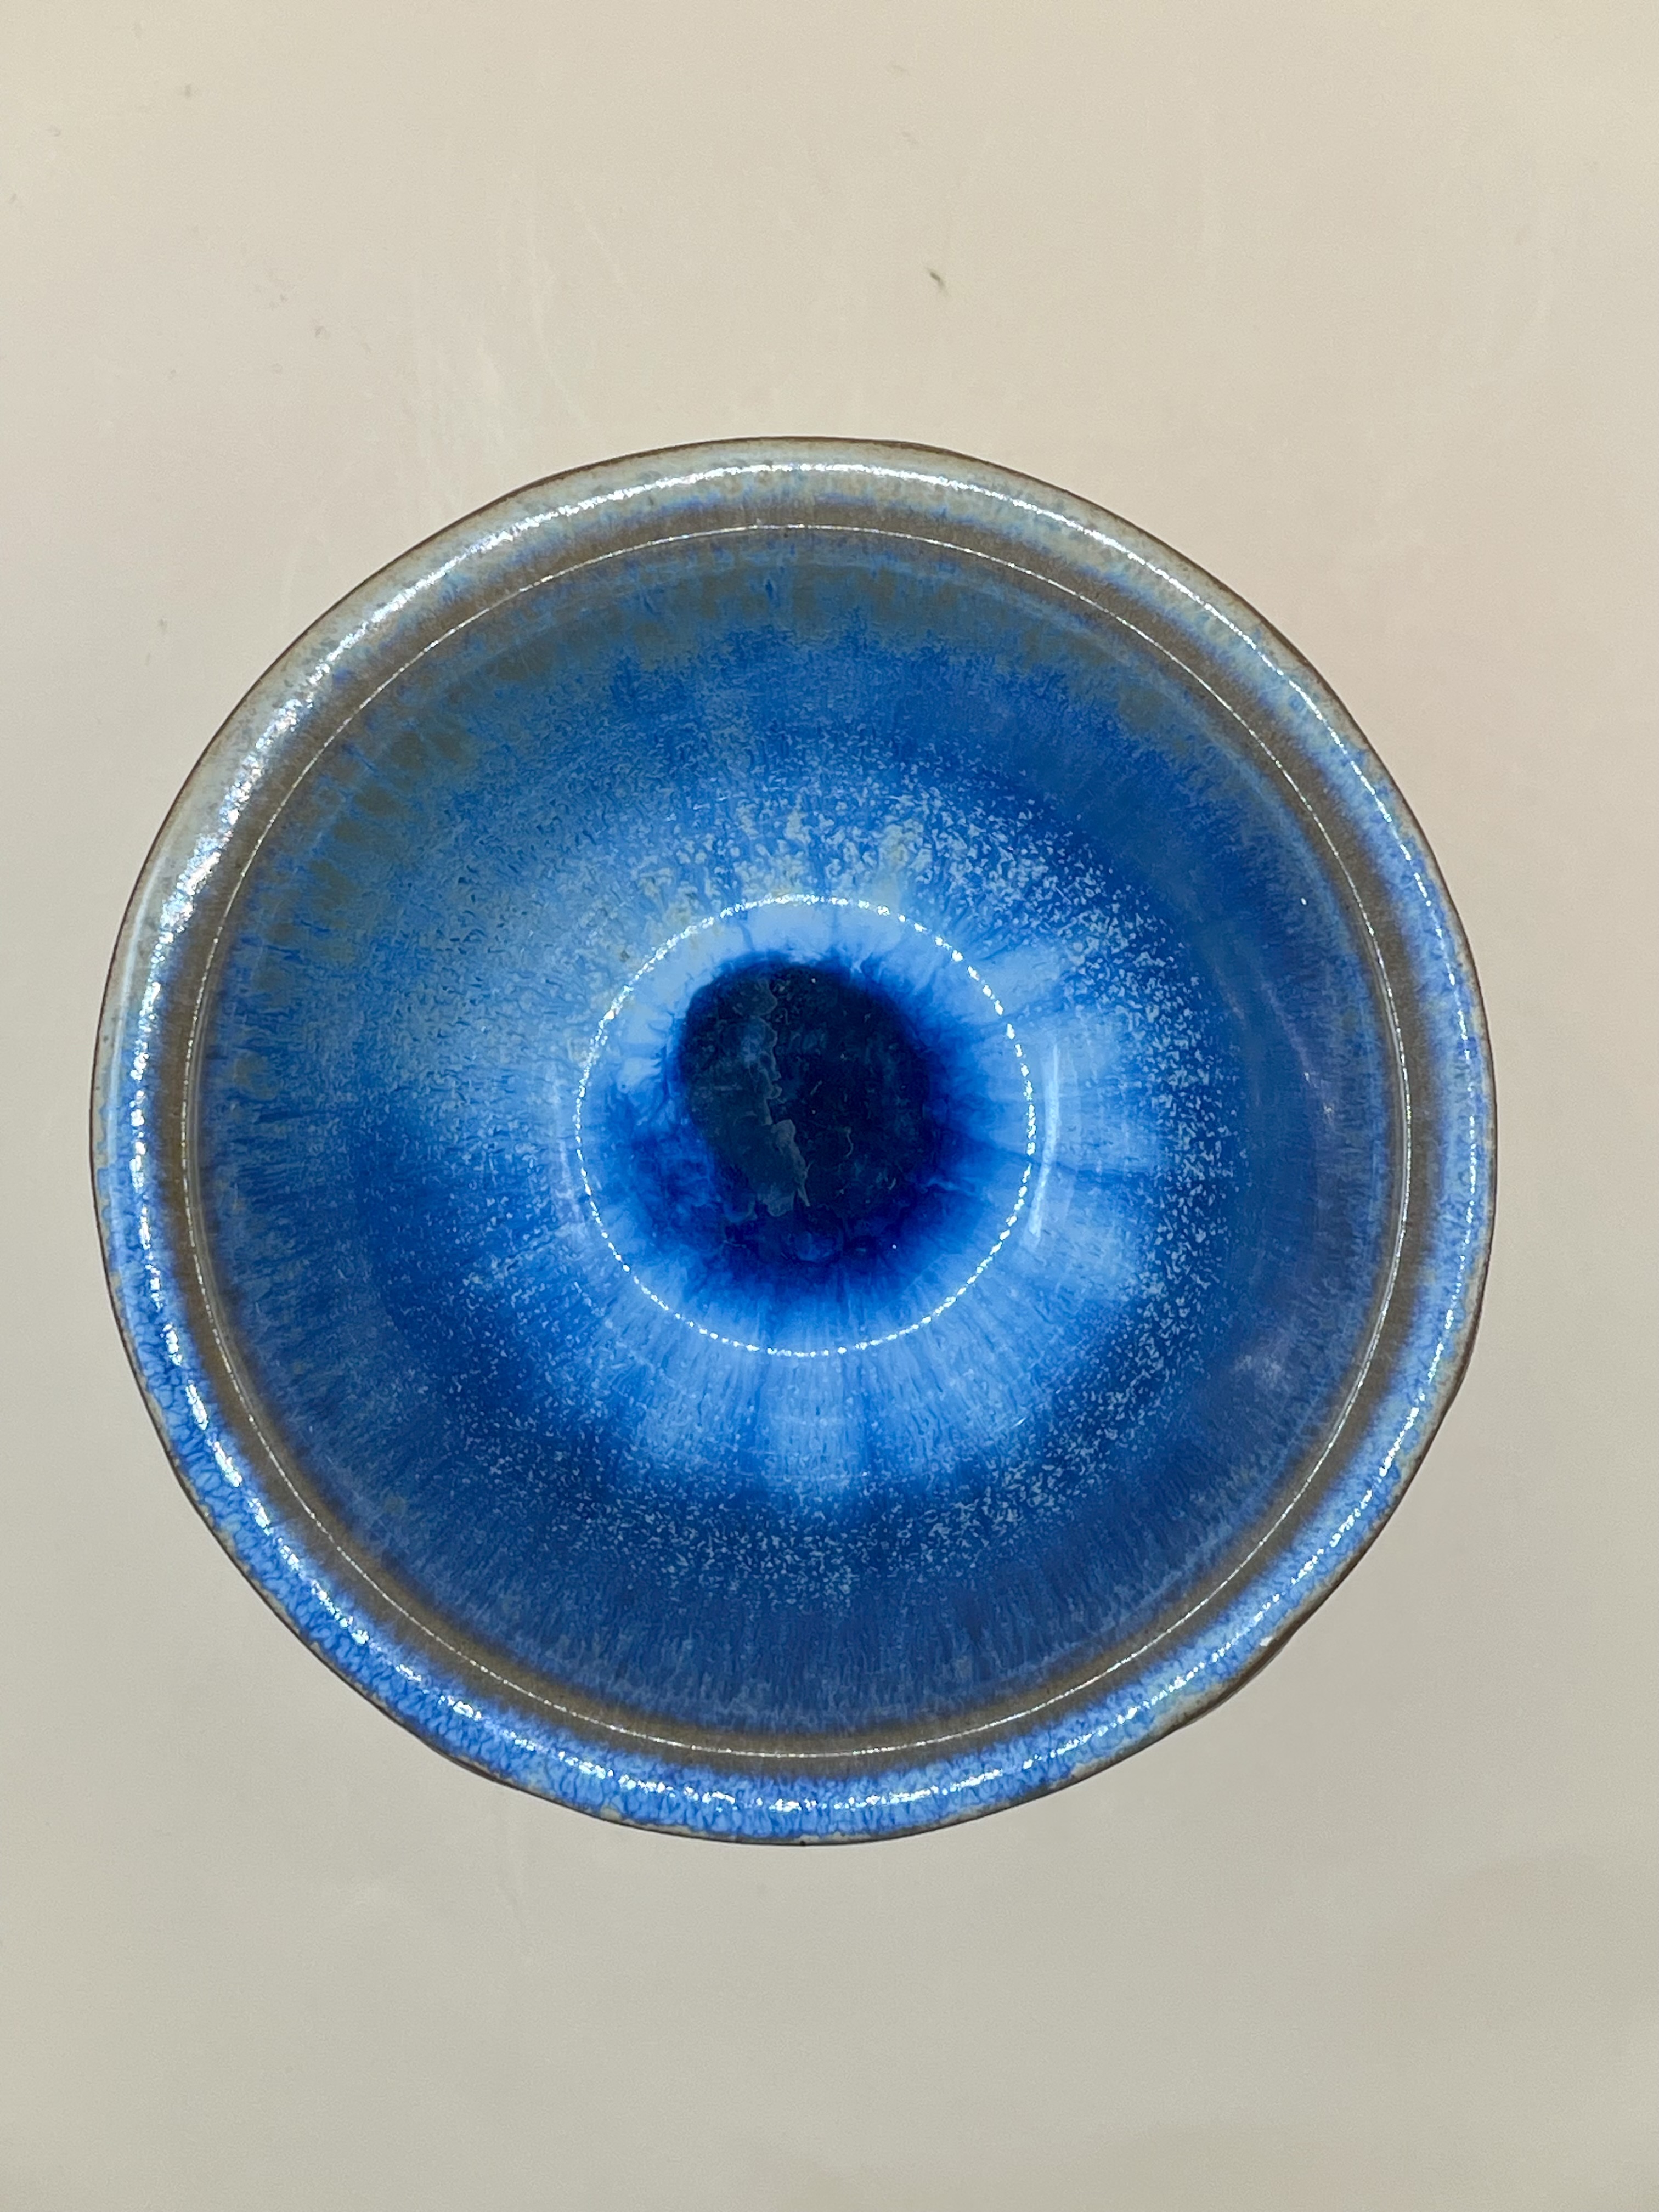 Rare Danish Bowl By Artist Michaal Andersen 1960s lovely goblet with great detail and blue ceramic b - Image 3 of 6